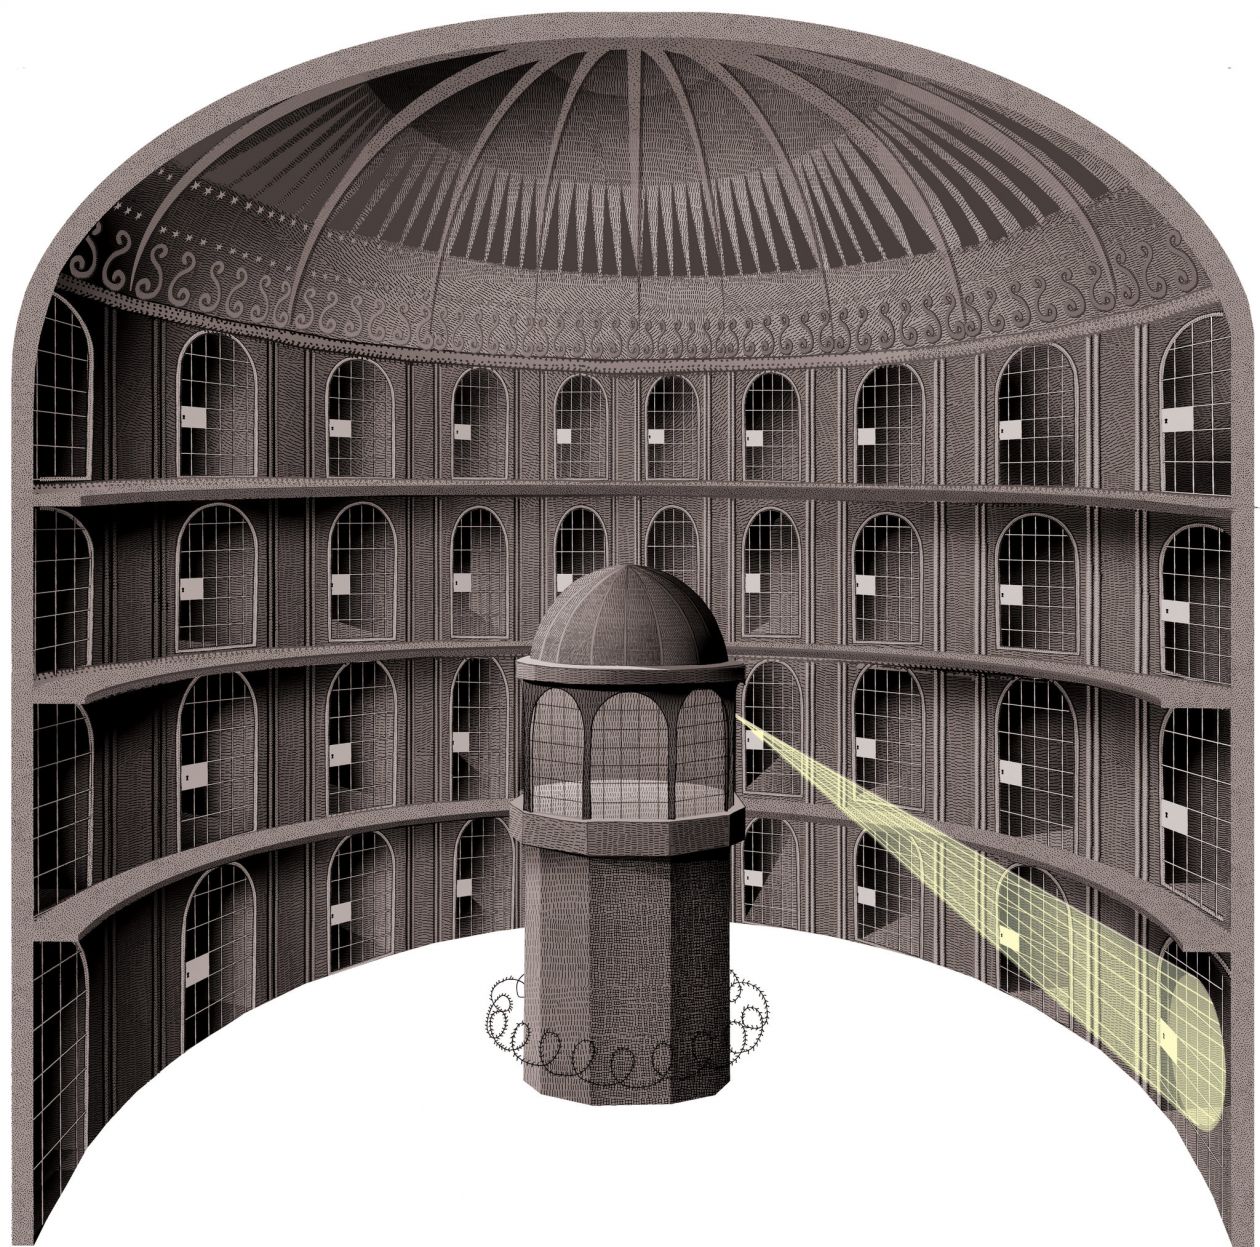 Image of the Panopticon